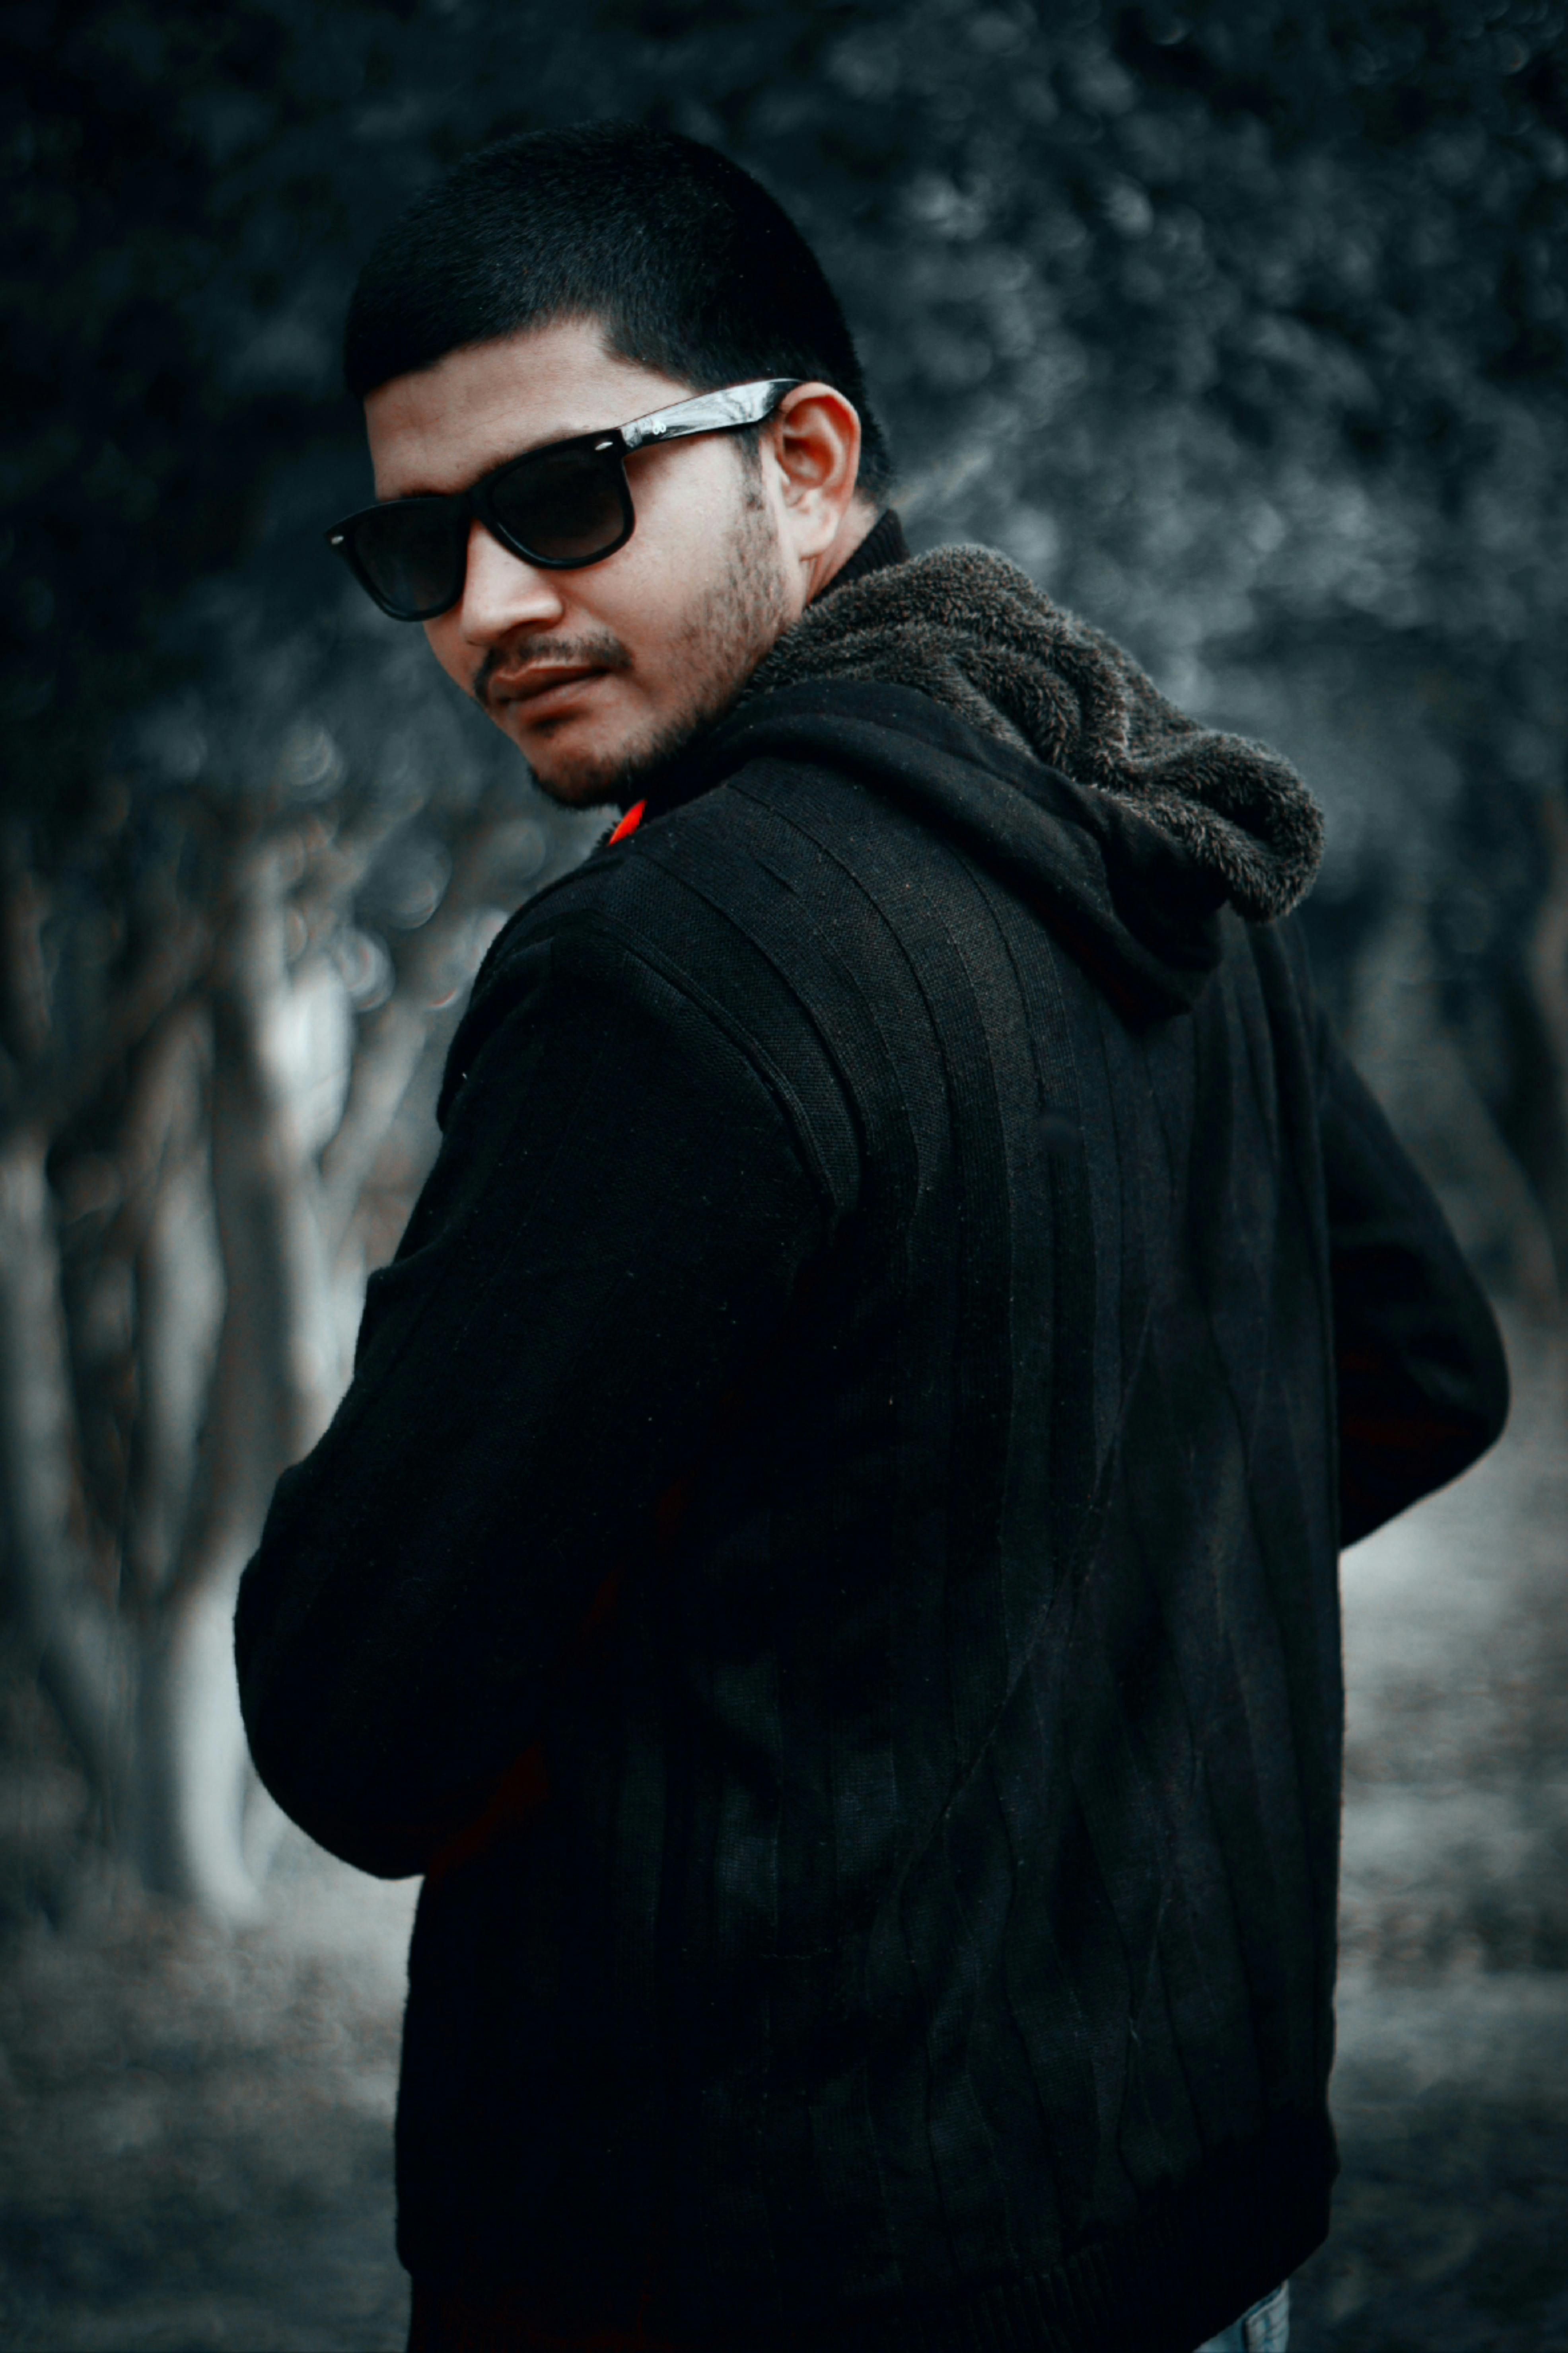 Man in Sunglasses and Black Clothes · Free Stock Photo